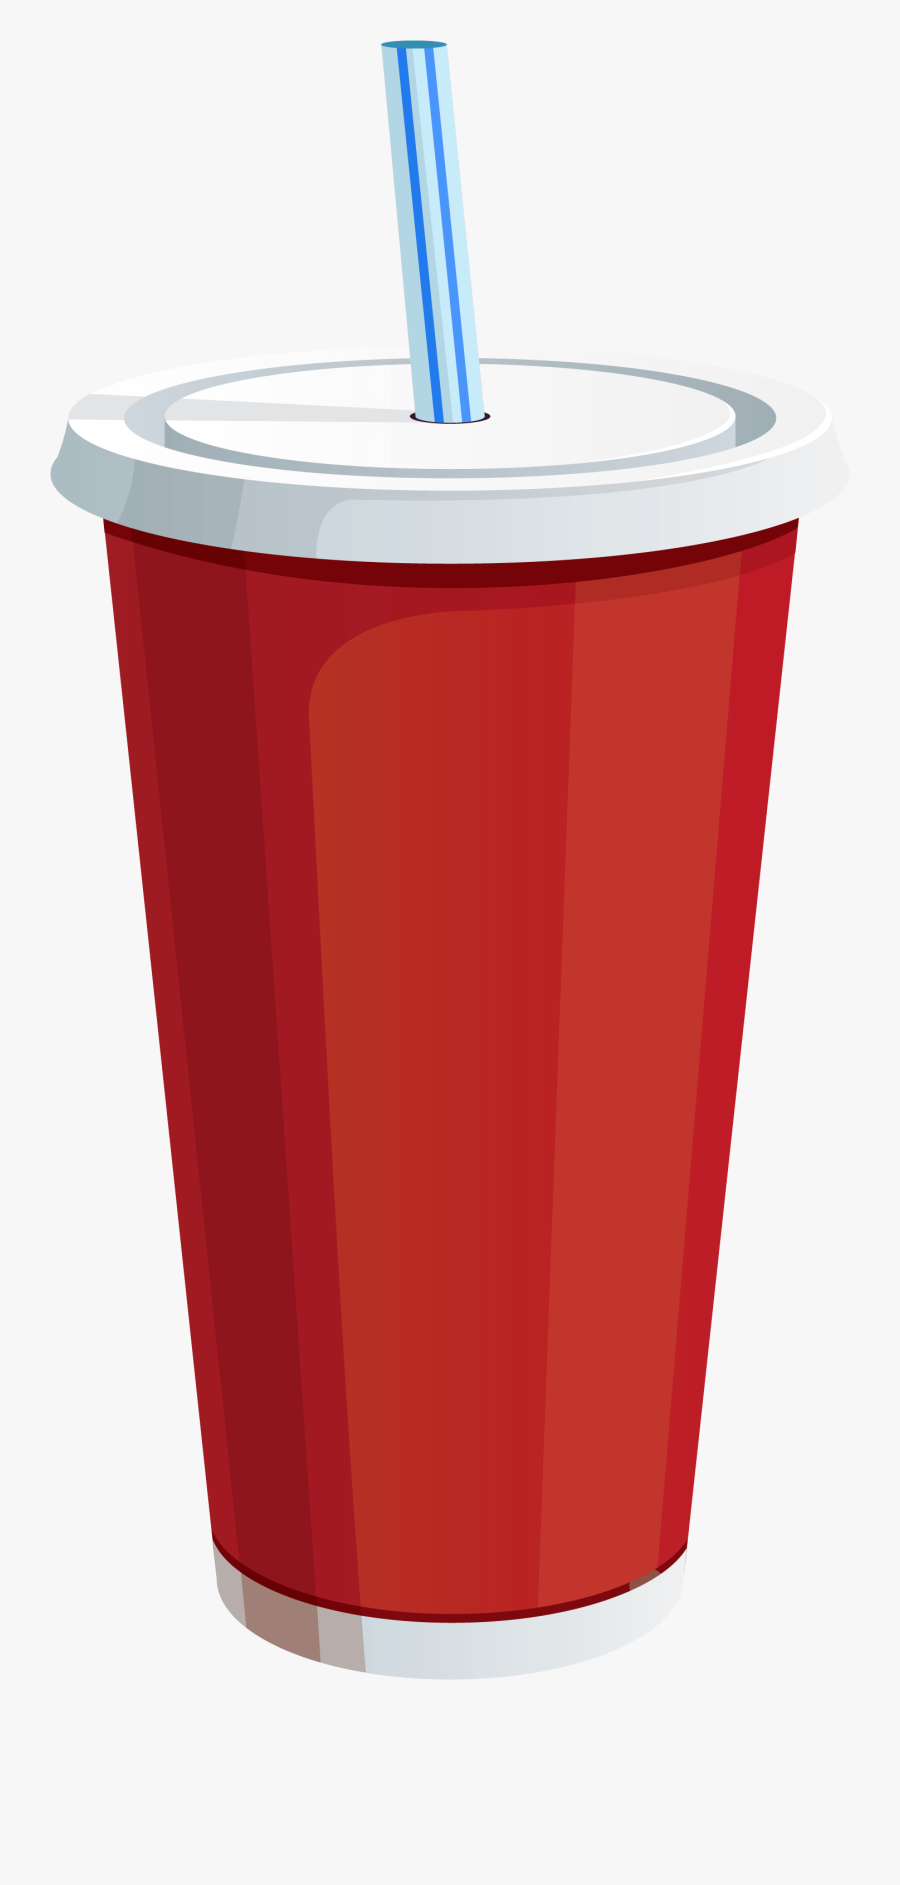 Drinking Cup Clipart - Transparent Background Drinks Clipart , Free ...